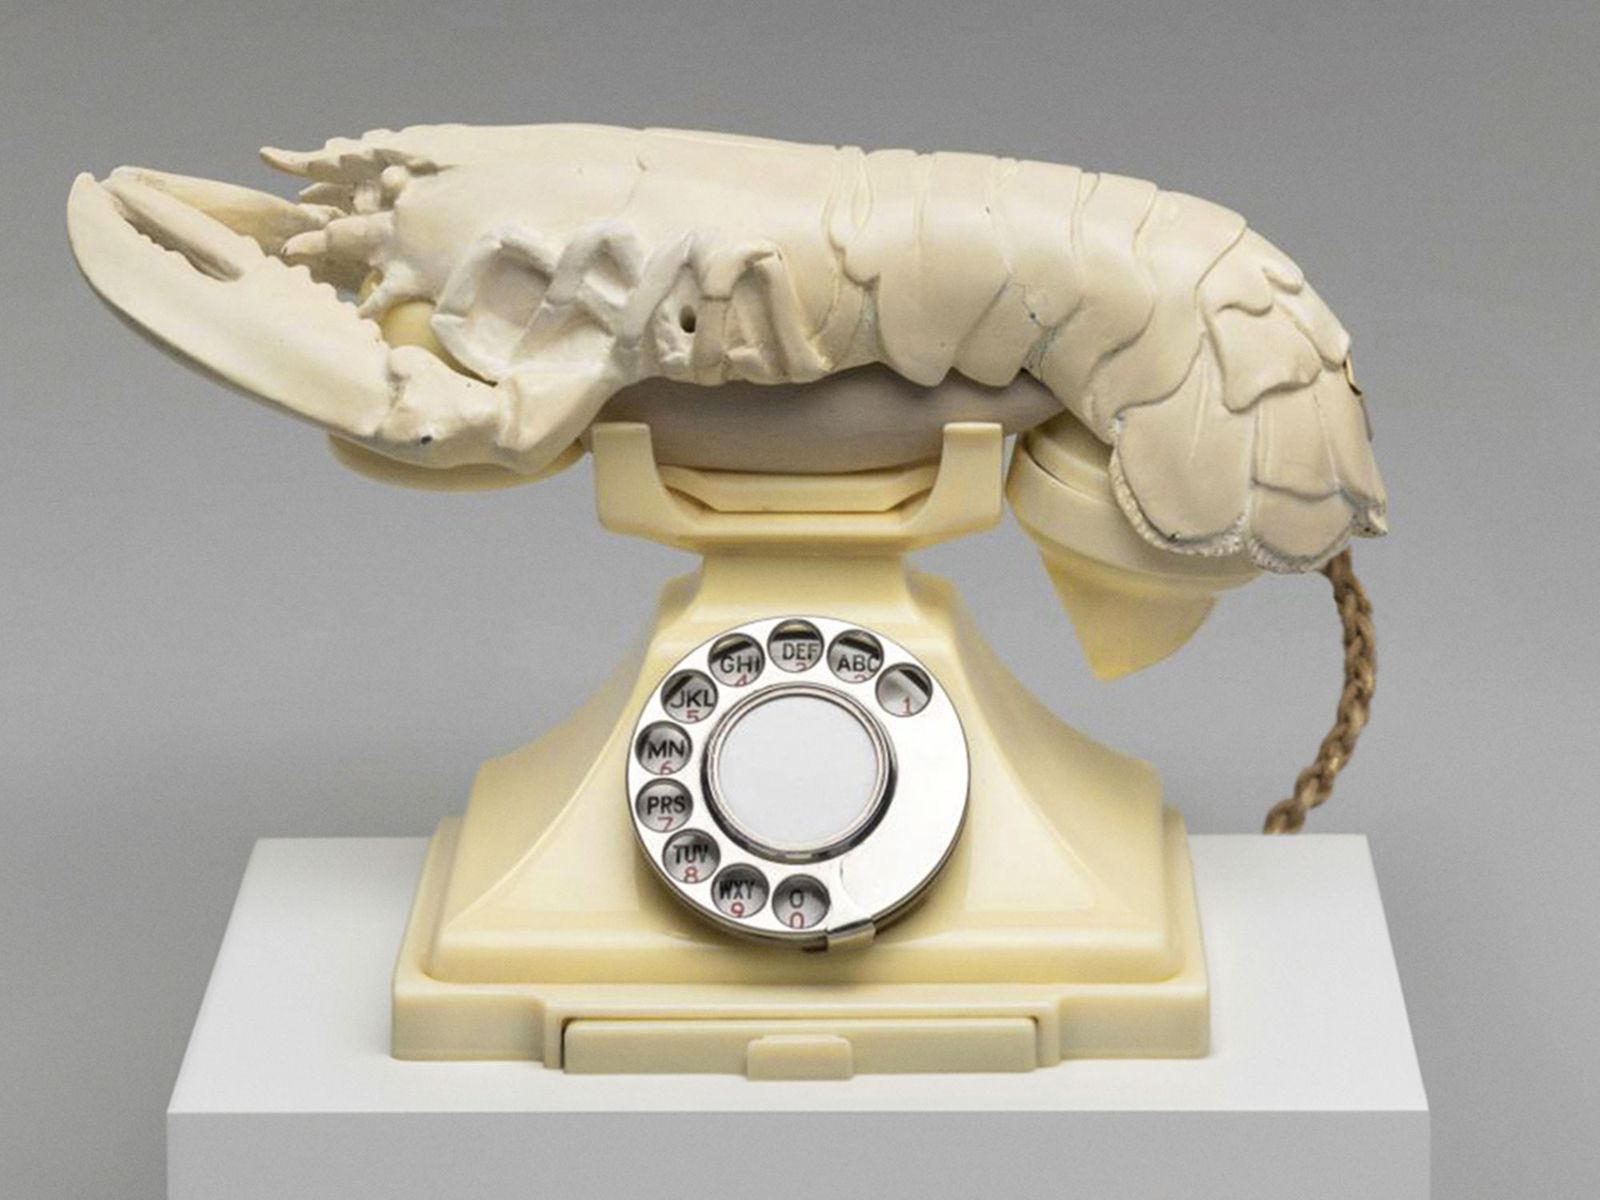 You Can Chat With an A.I. Replica of Salvador Dalí